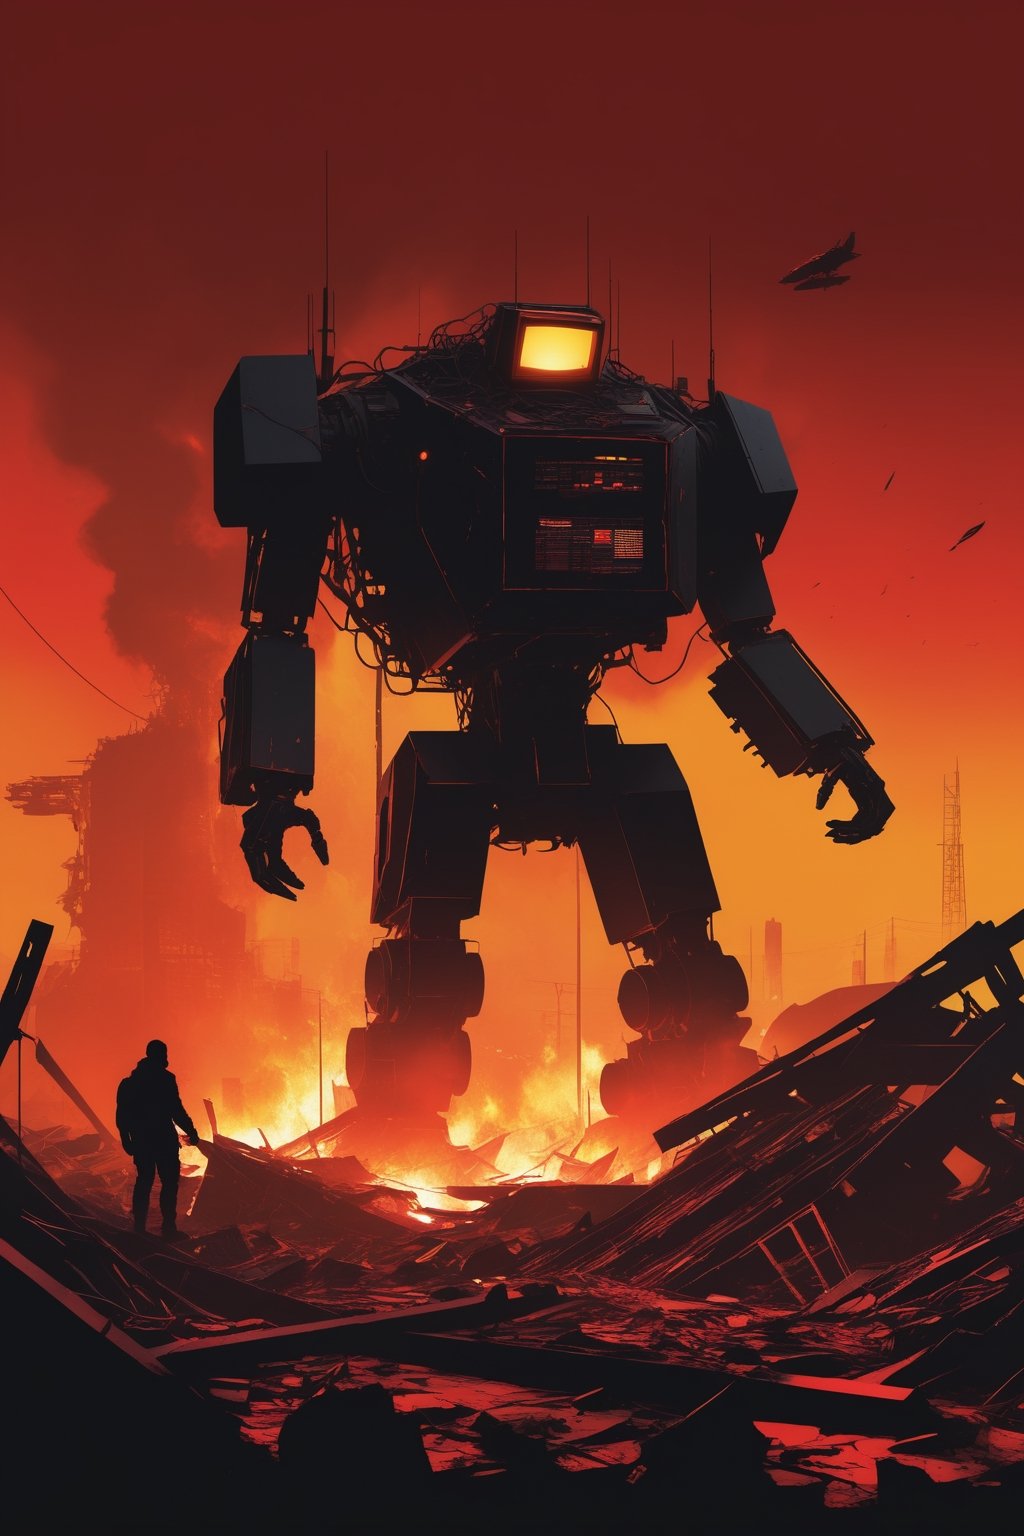 High contrast vector art, (Giant computer burning in red and yellow hues:1.3), Noir silhouette style, Sci-fi setting, (Wreckage and debris:1.2), Dystopian atmosphere, Futuristic elements, Dramatic composition.